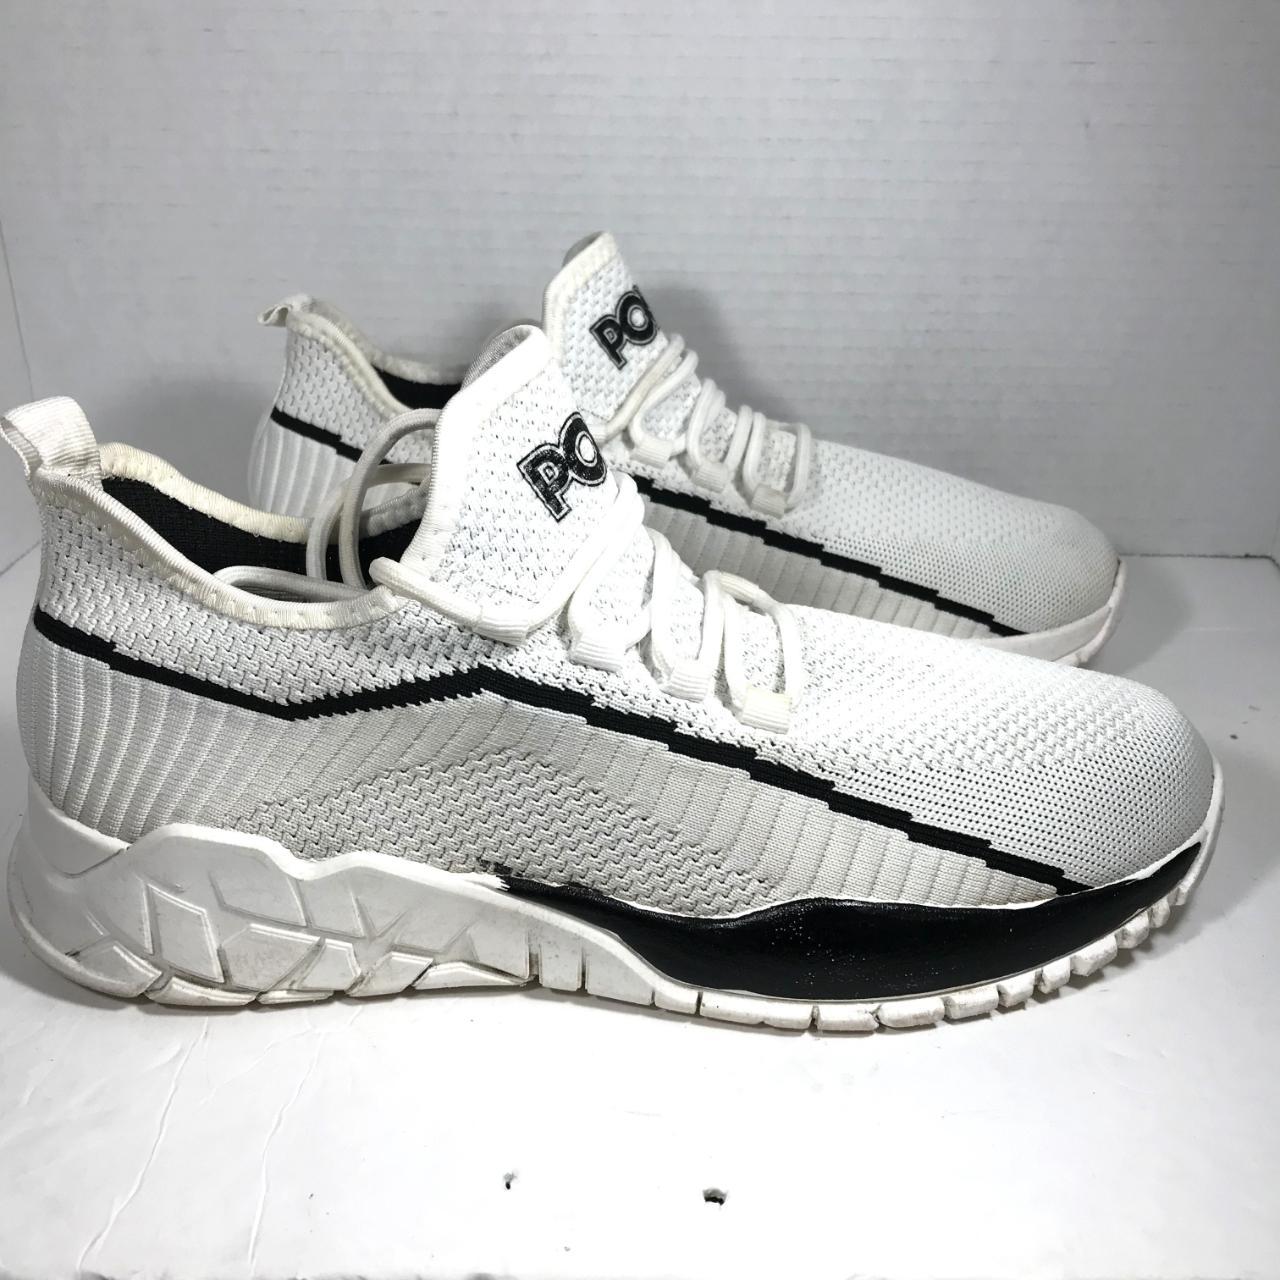 Pony Men's White and Black Trainers